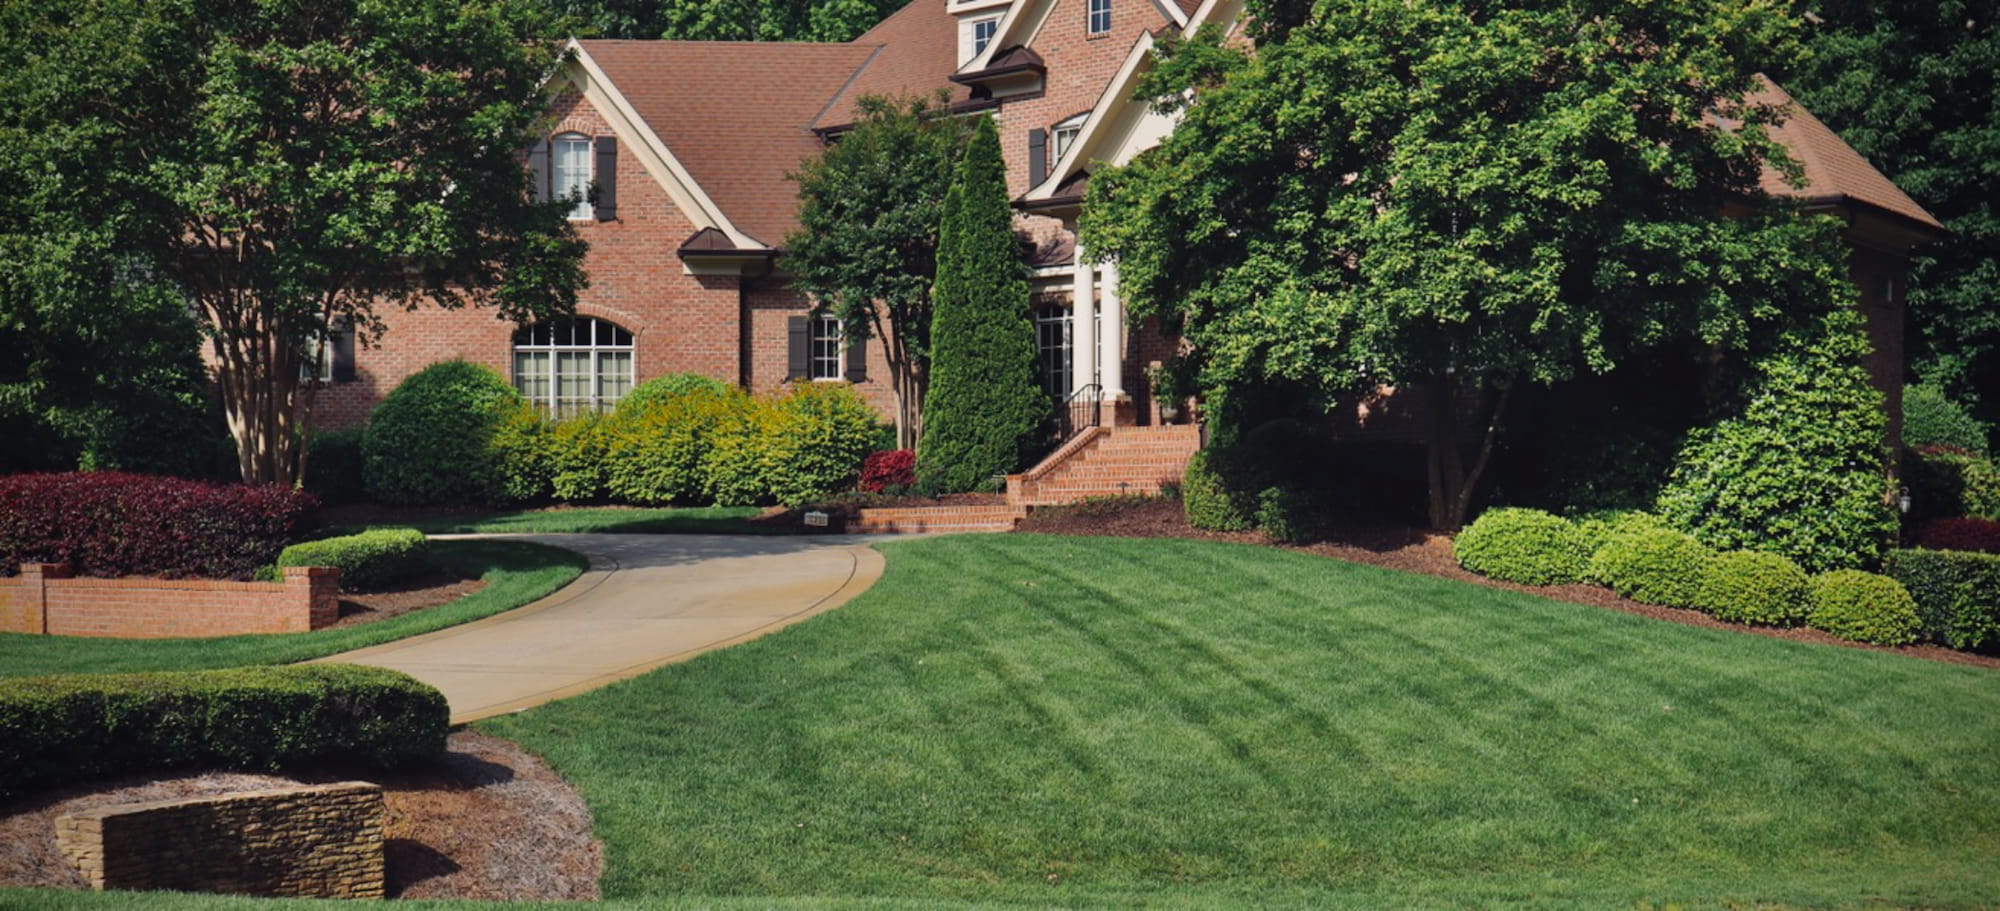 A well cared for yard courtesy of Agape the top-rated lawn care service company in Raleigh NC